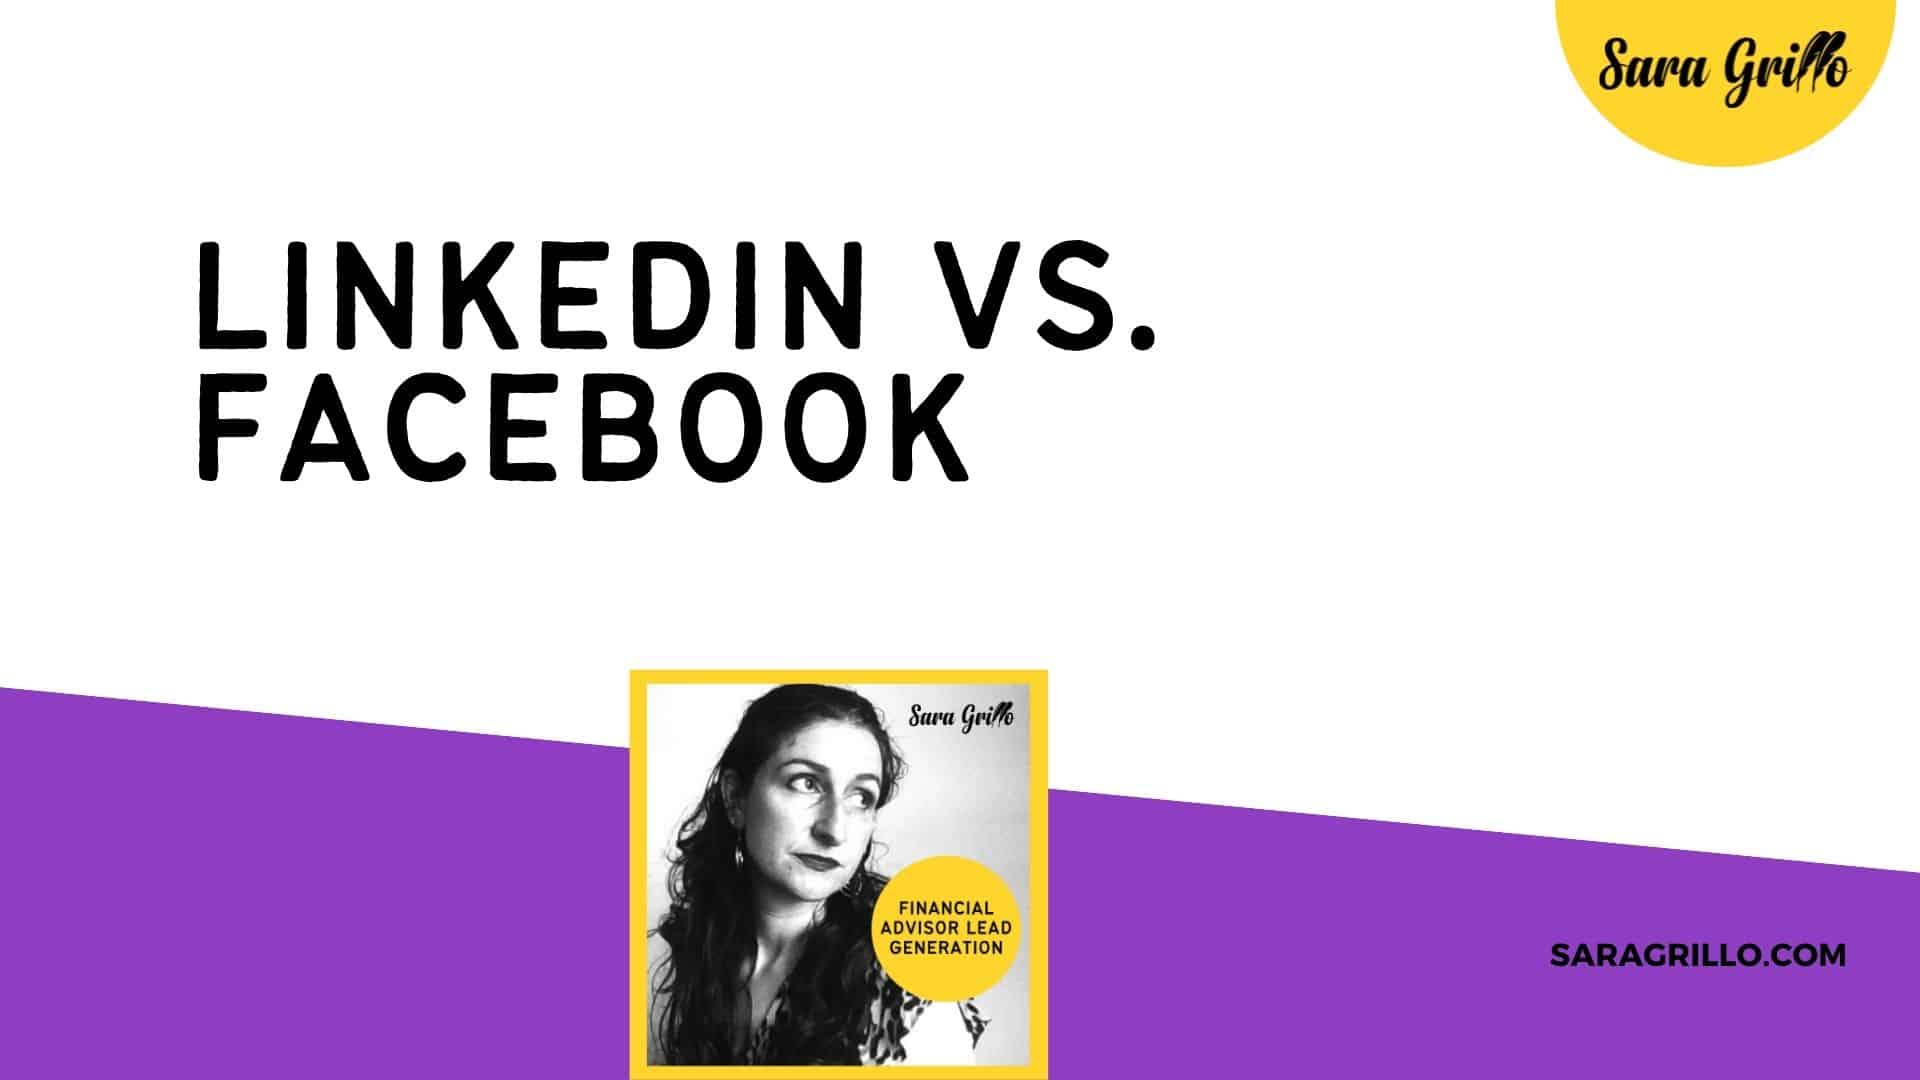 This blog compares LinkedIn vs. Facebook for financial advisors and discusses which is better to use to market your practice.